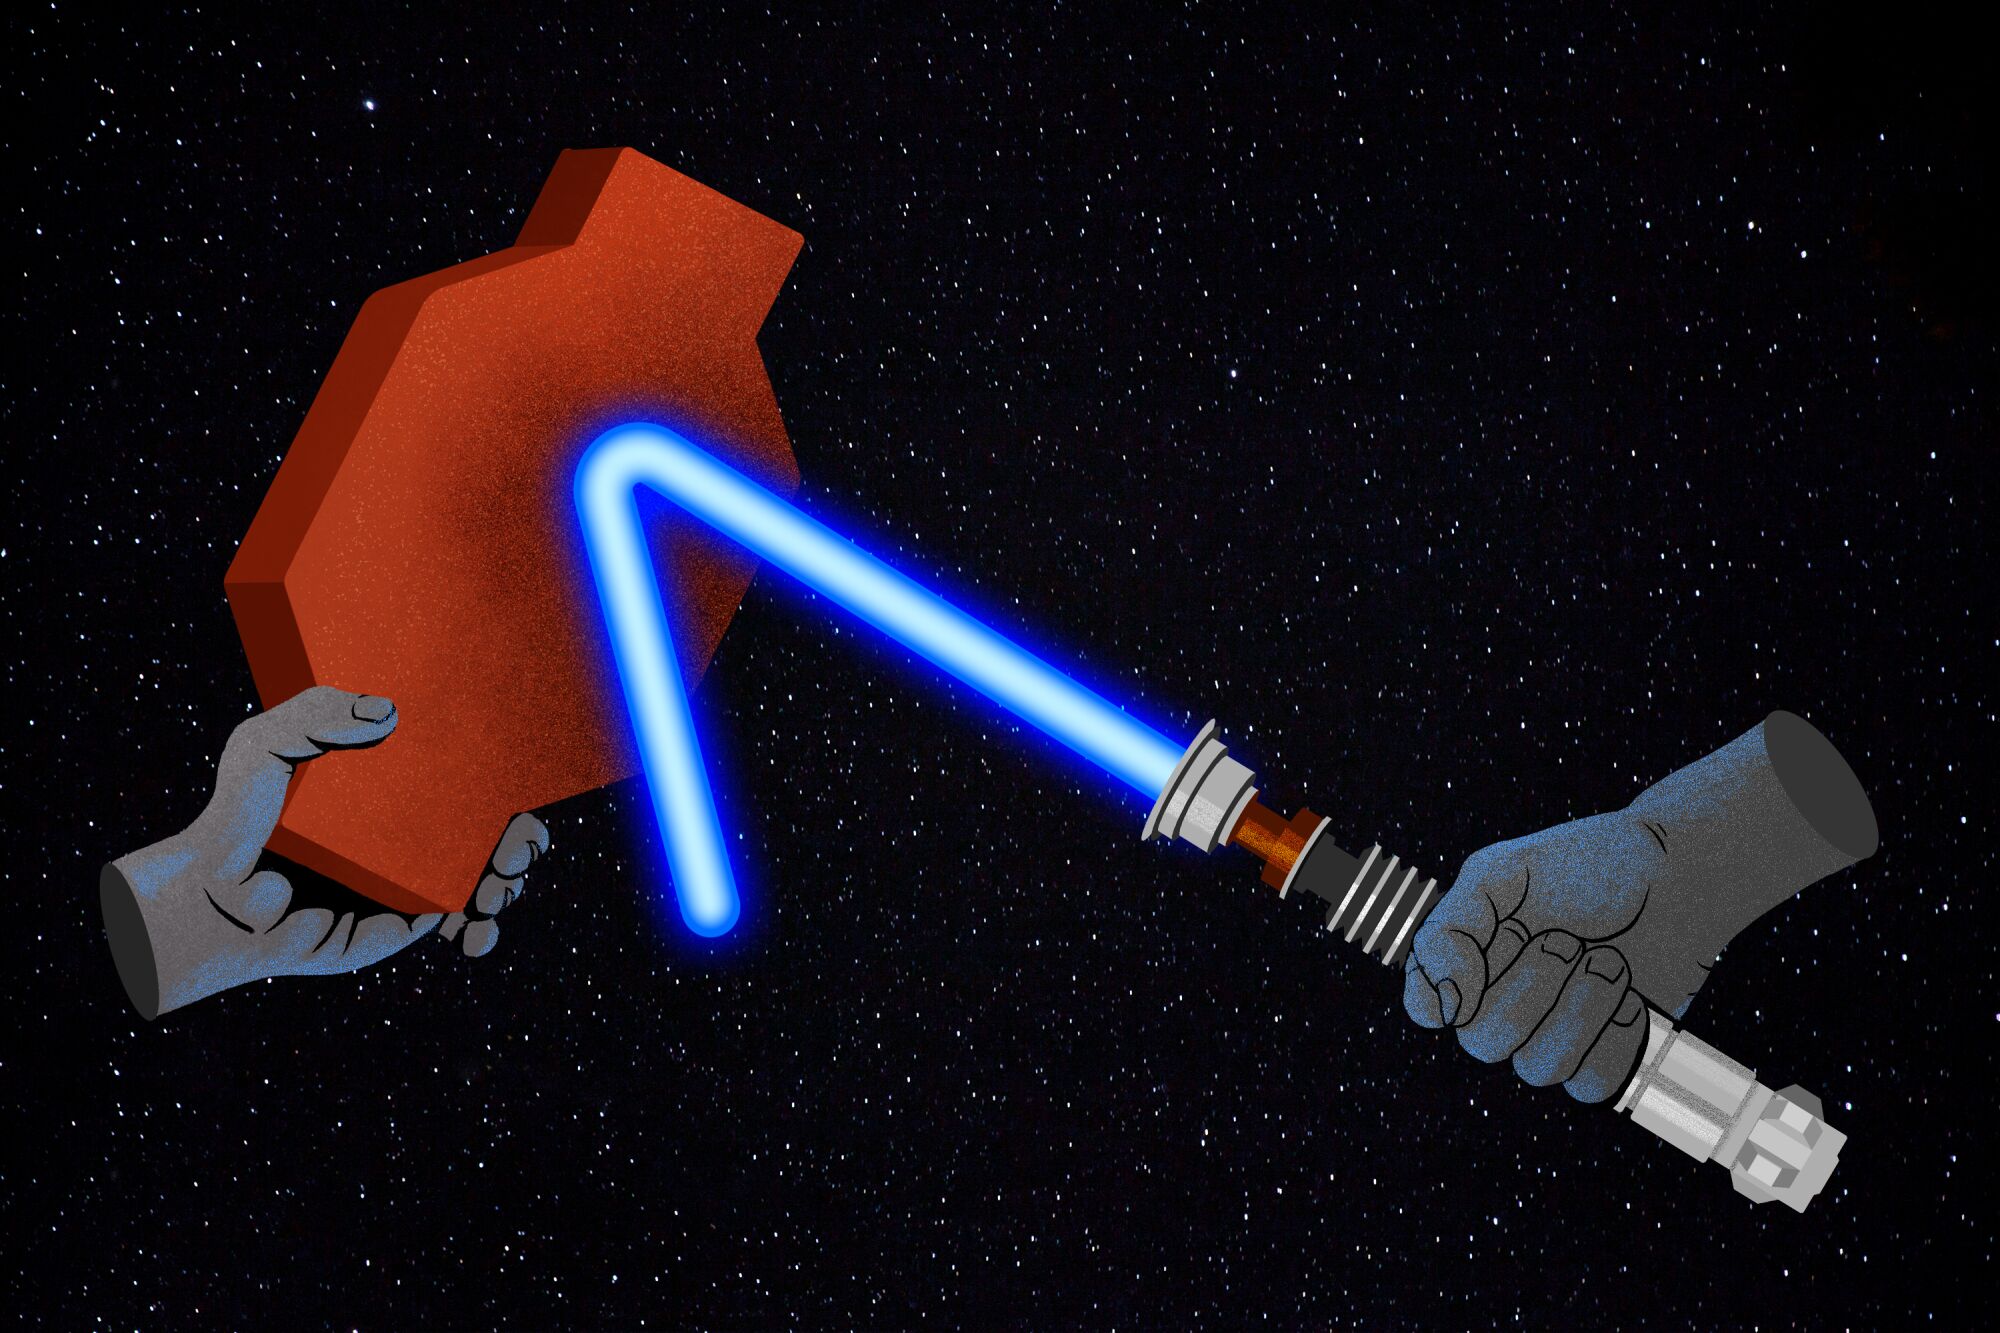 Illustration of two hands holding a Funereal brick and lightsaber, the lightsaber is bent by the brick.